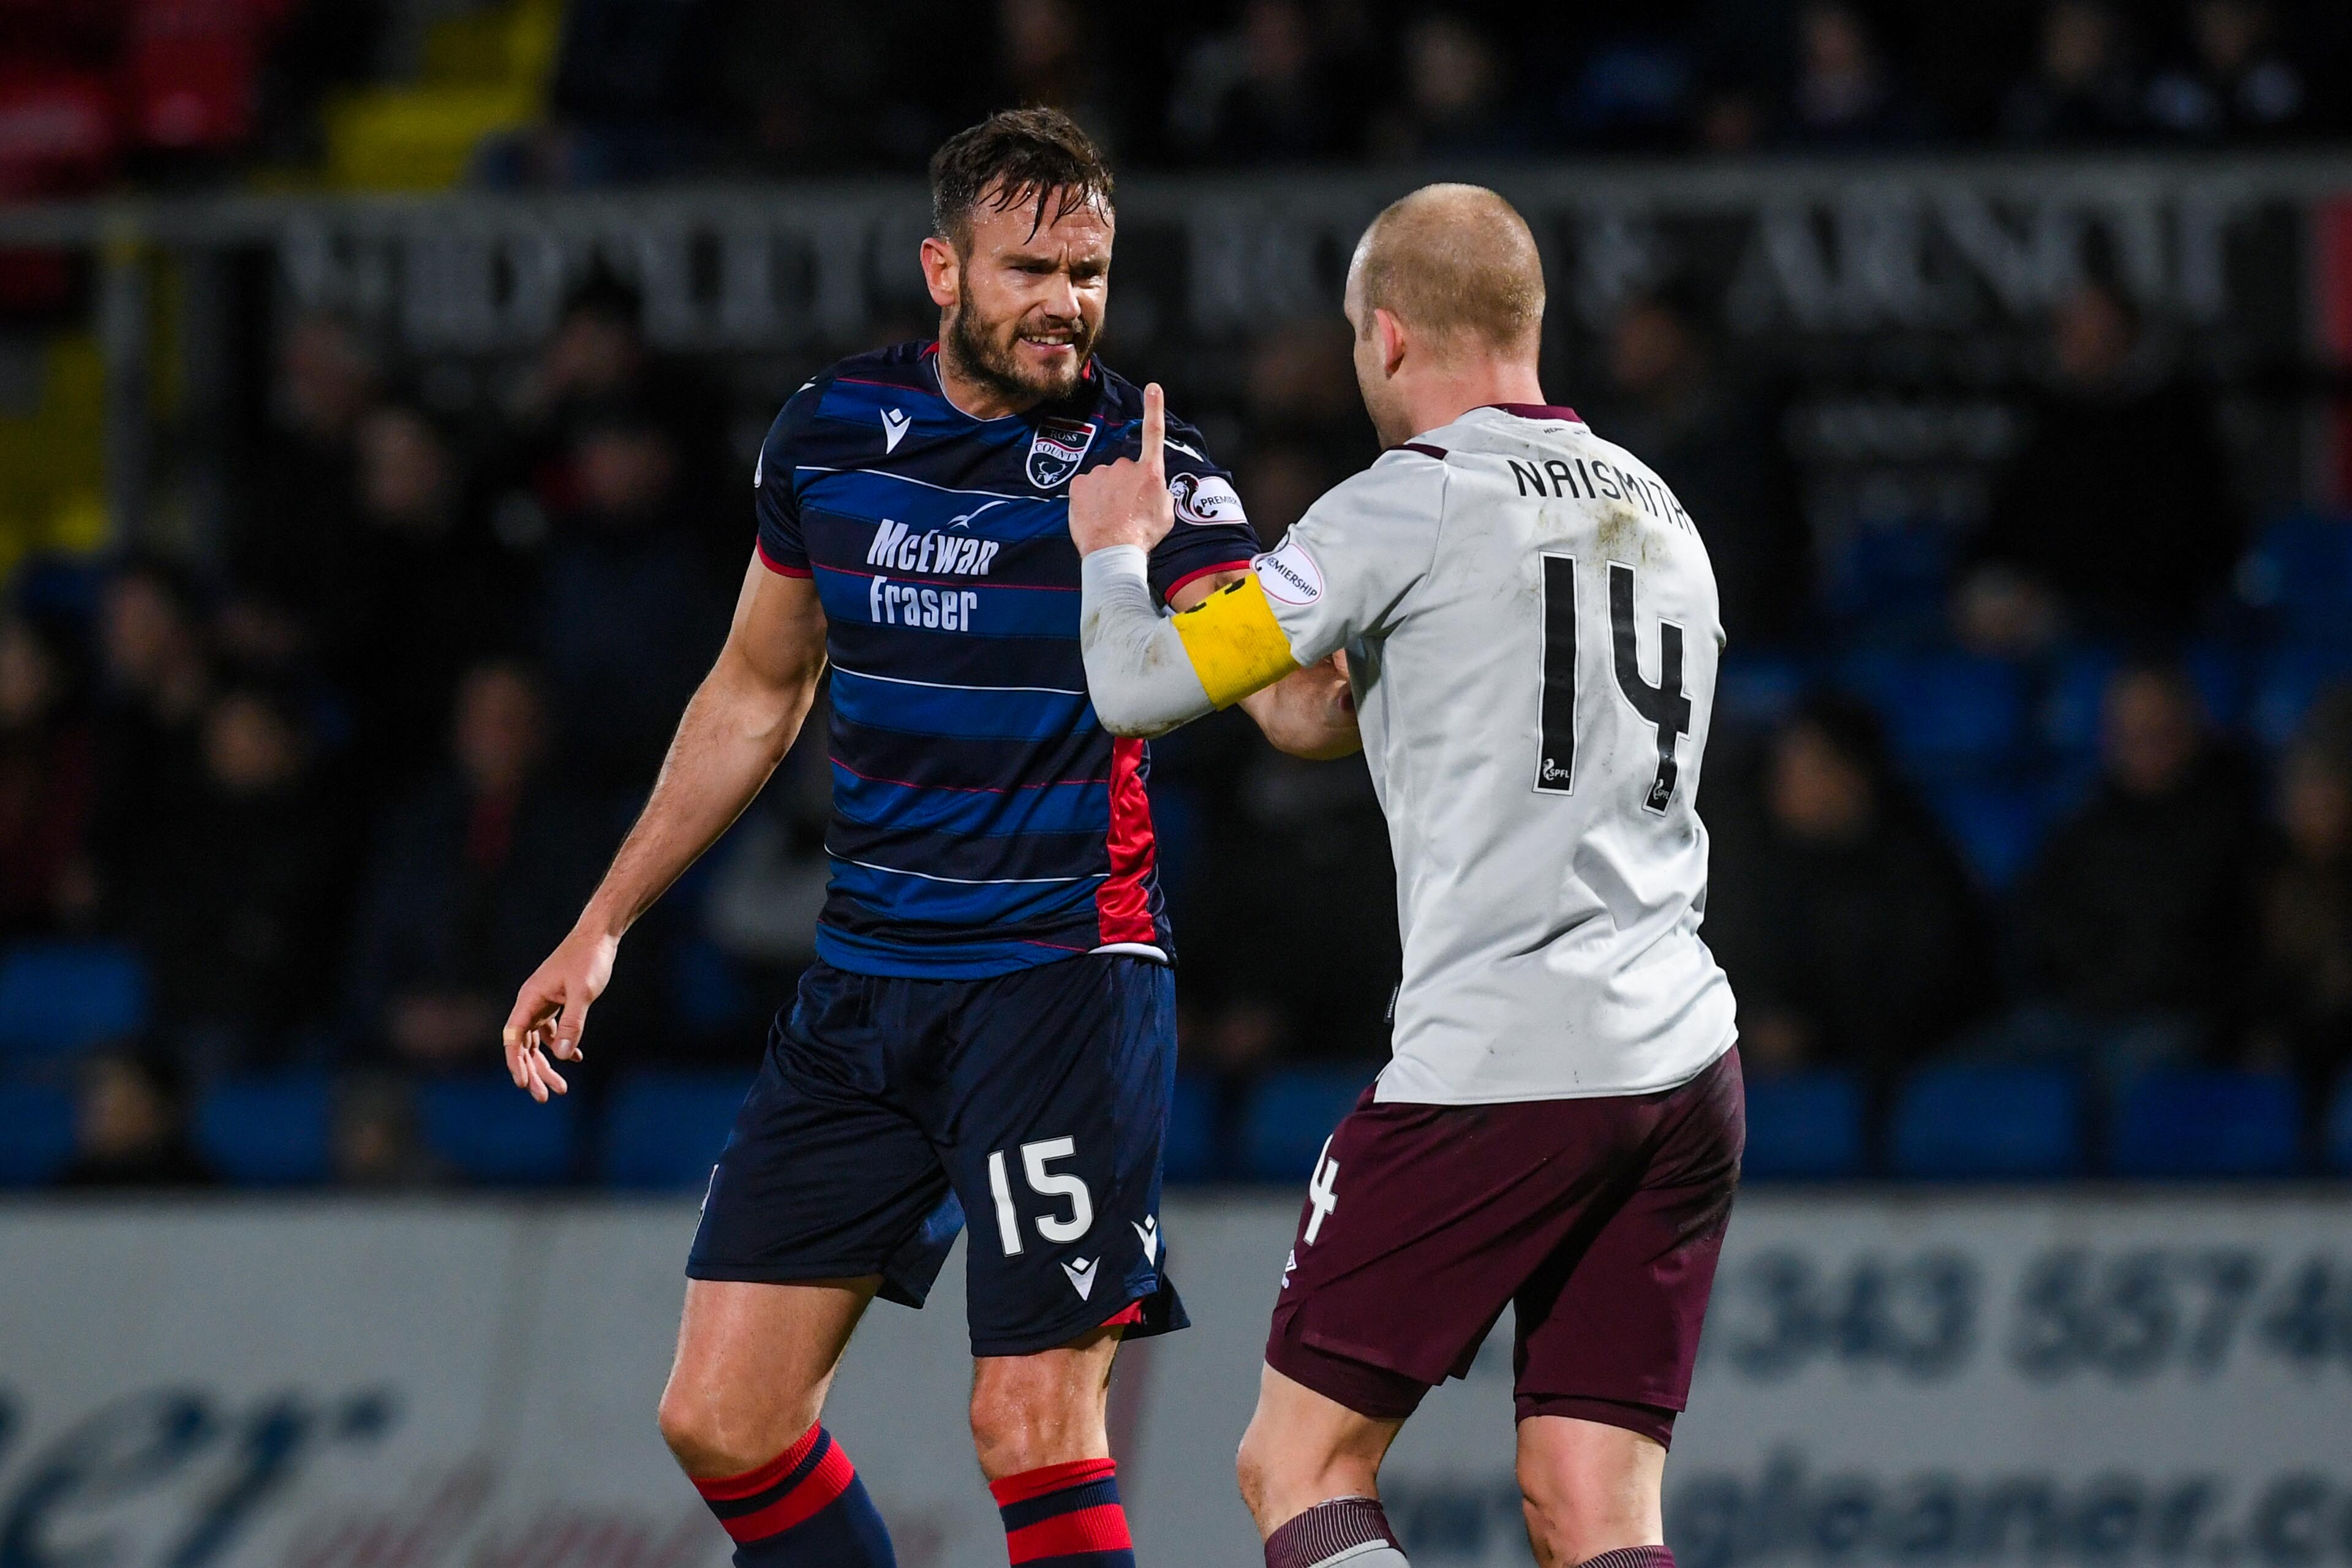 Keith Watson and Steven Naismith exchange verbals during the clash at Victoria Park between Ross County and Hearts